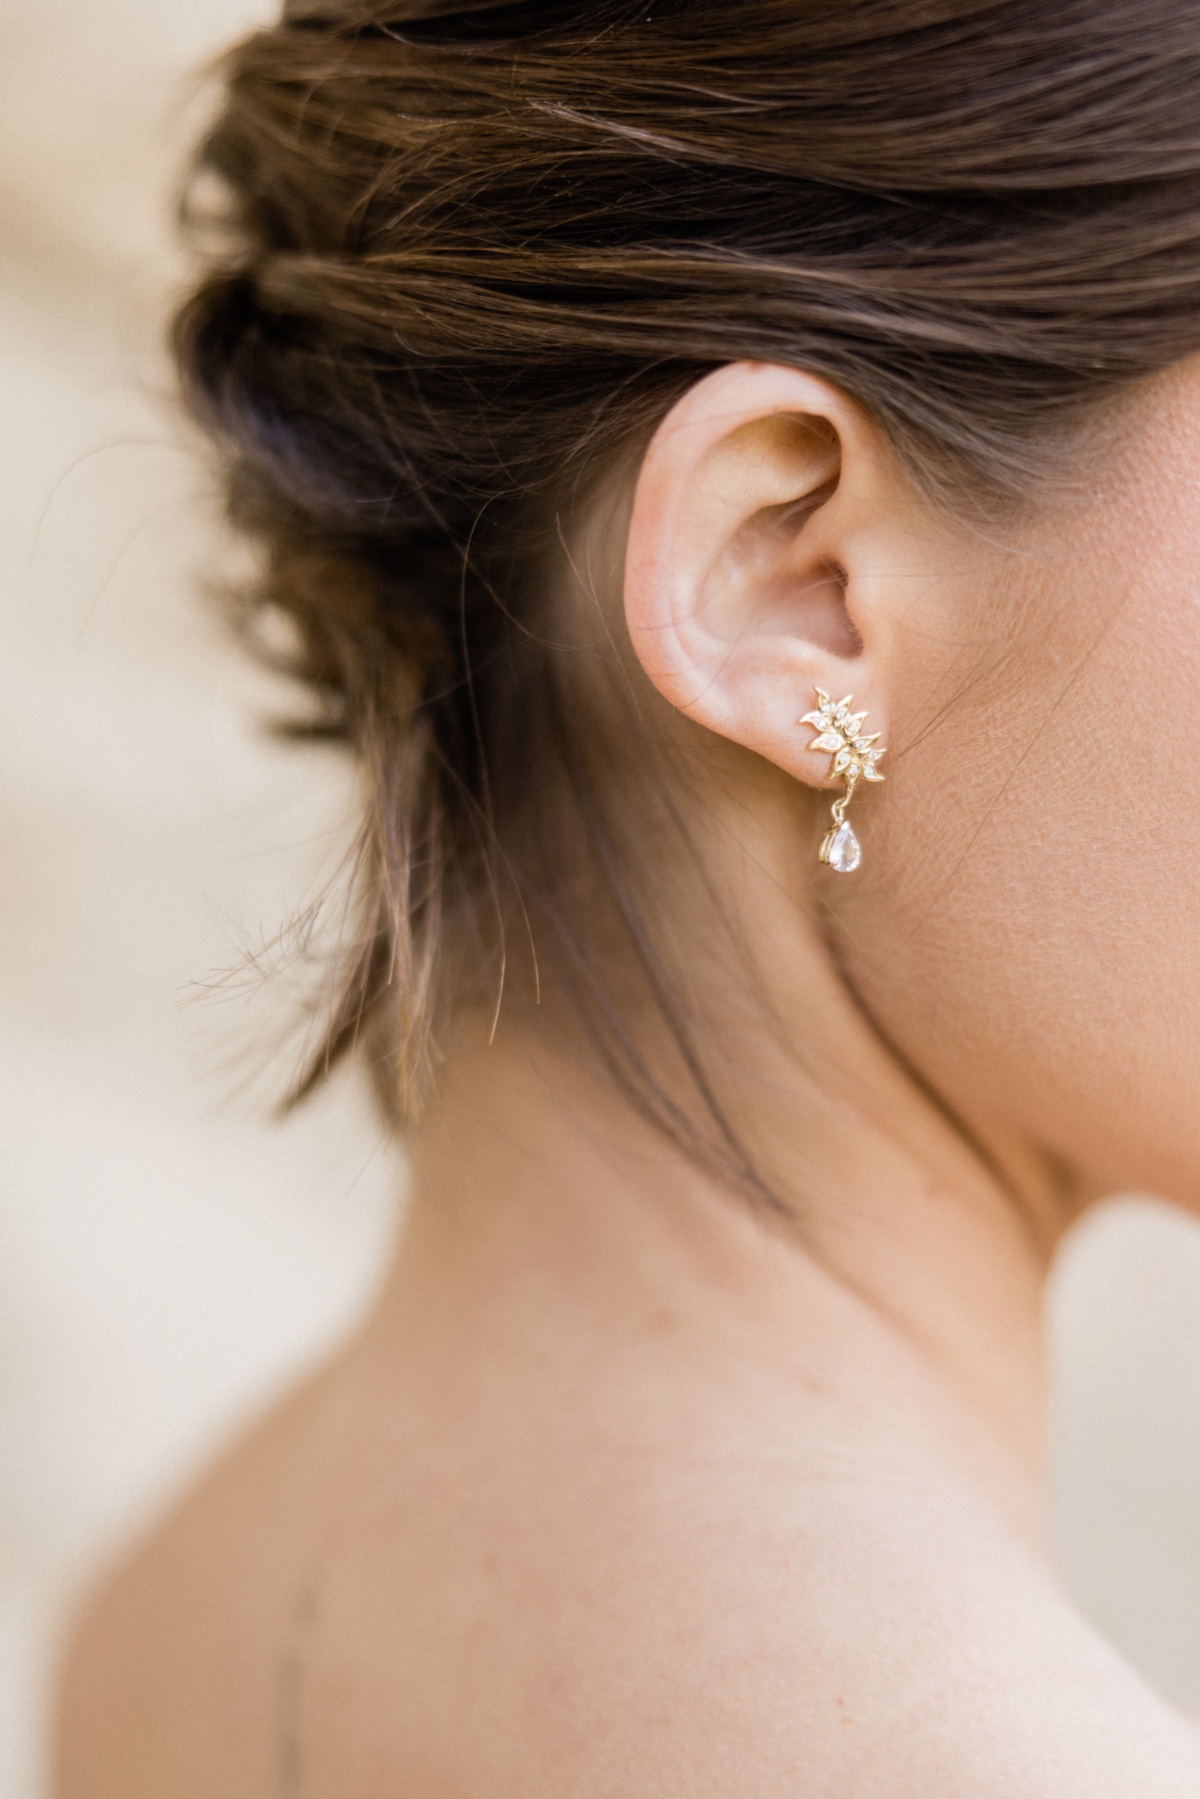 contemporary wedding earring styles